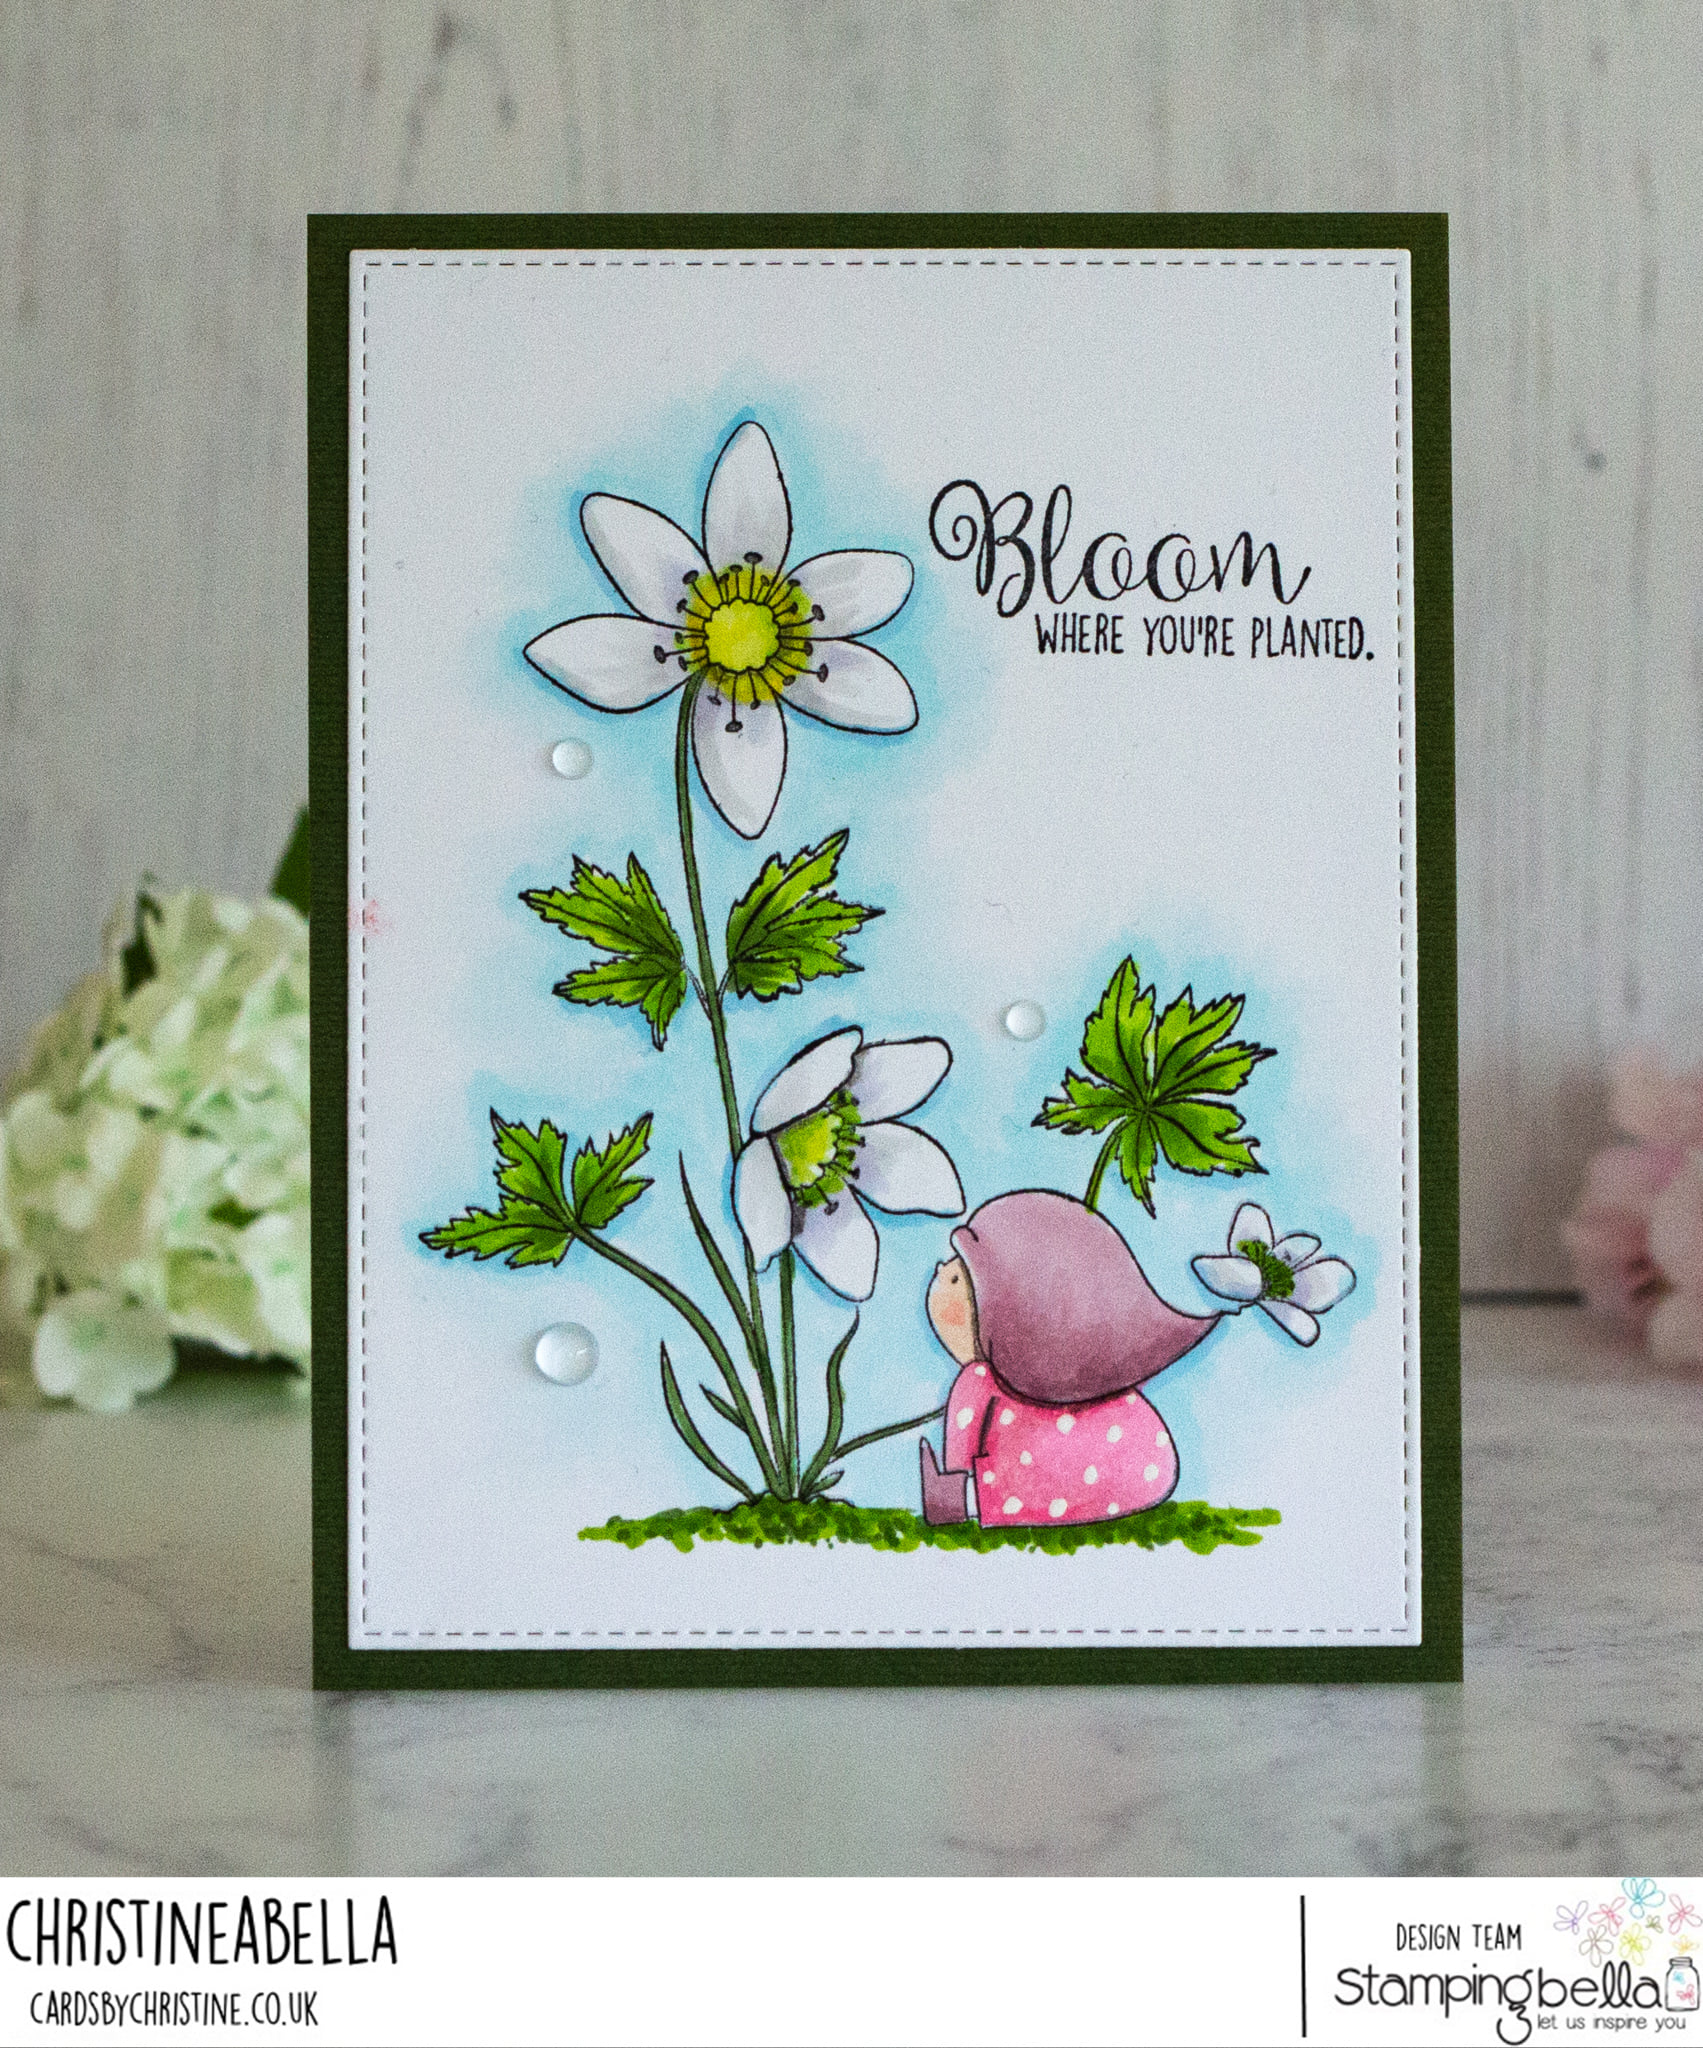 www.stampingbella.com: rubber stamp used: BUNDLE GIRL with a WOOD ANEMONE card by Christine Levison